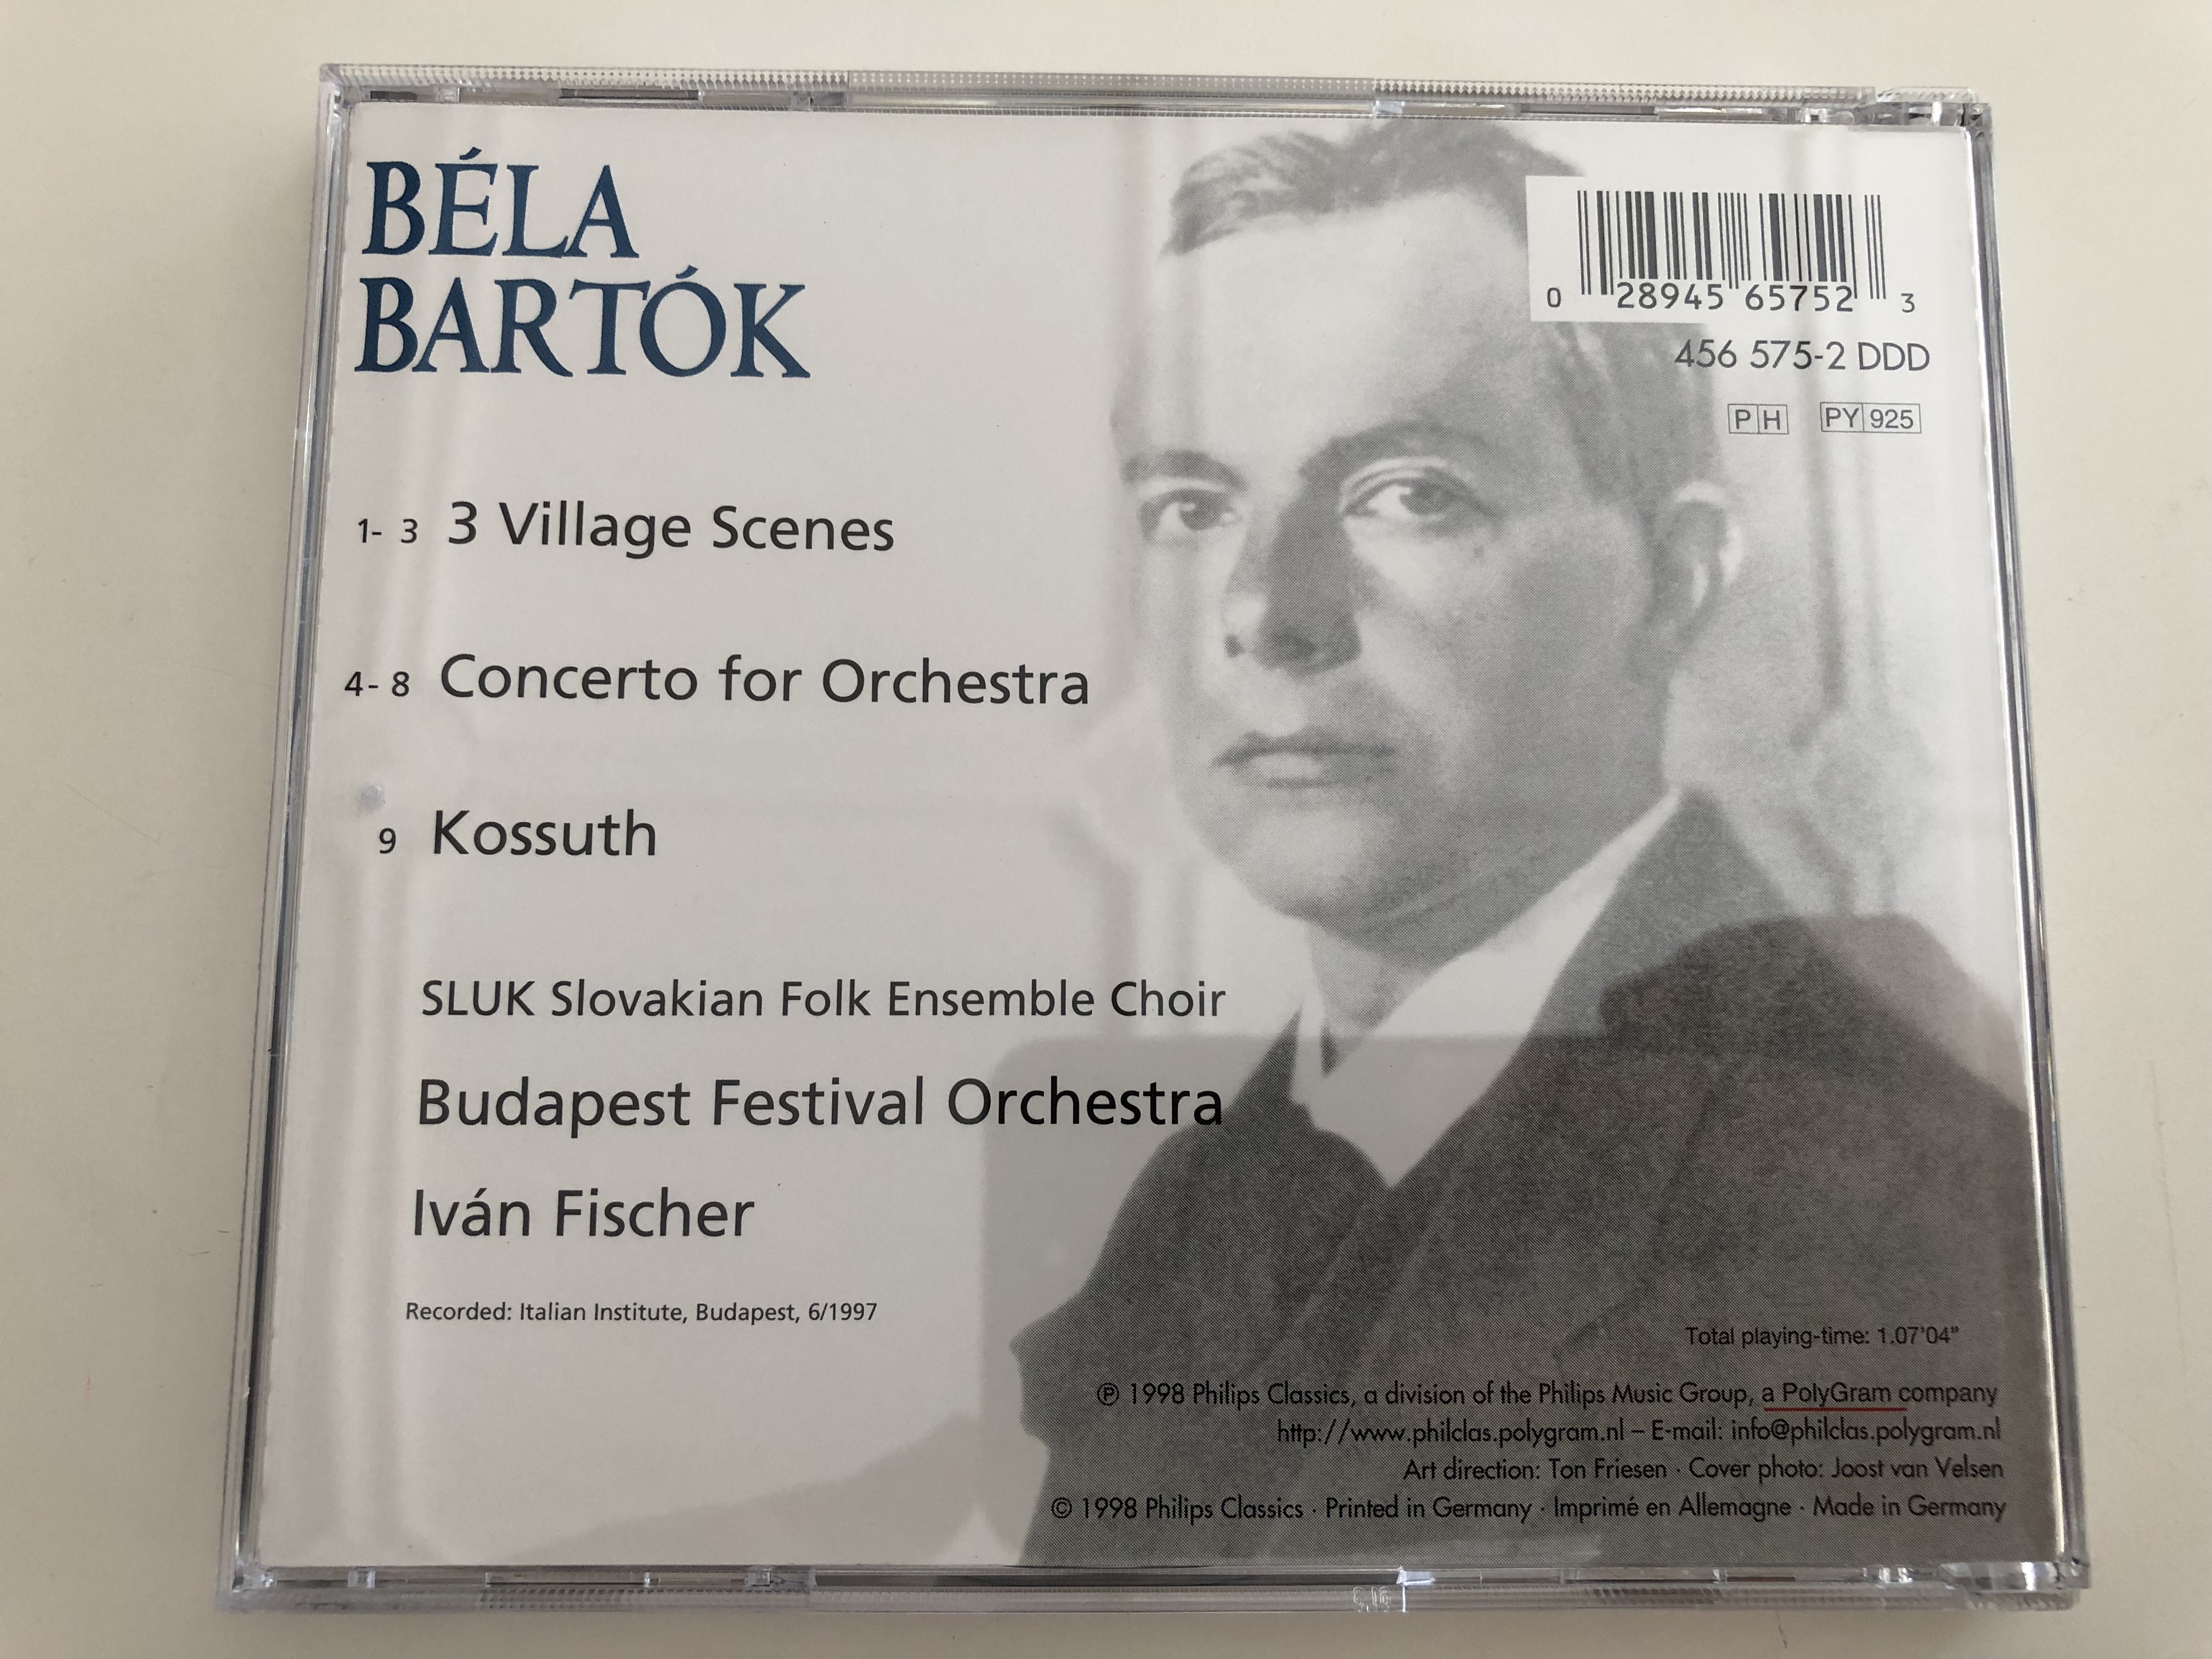 b-la-bart-k-concerto-for-orchestra-3-village-scenes-kossuth-budapest-festival-orchestra-conducted-by-ivan-fischer-philips-classics-audio-cd-1998-456-575-2-7-.jpg